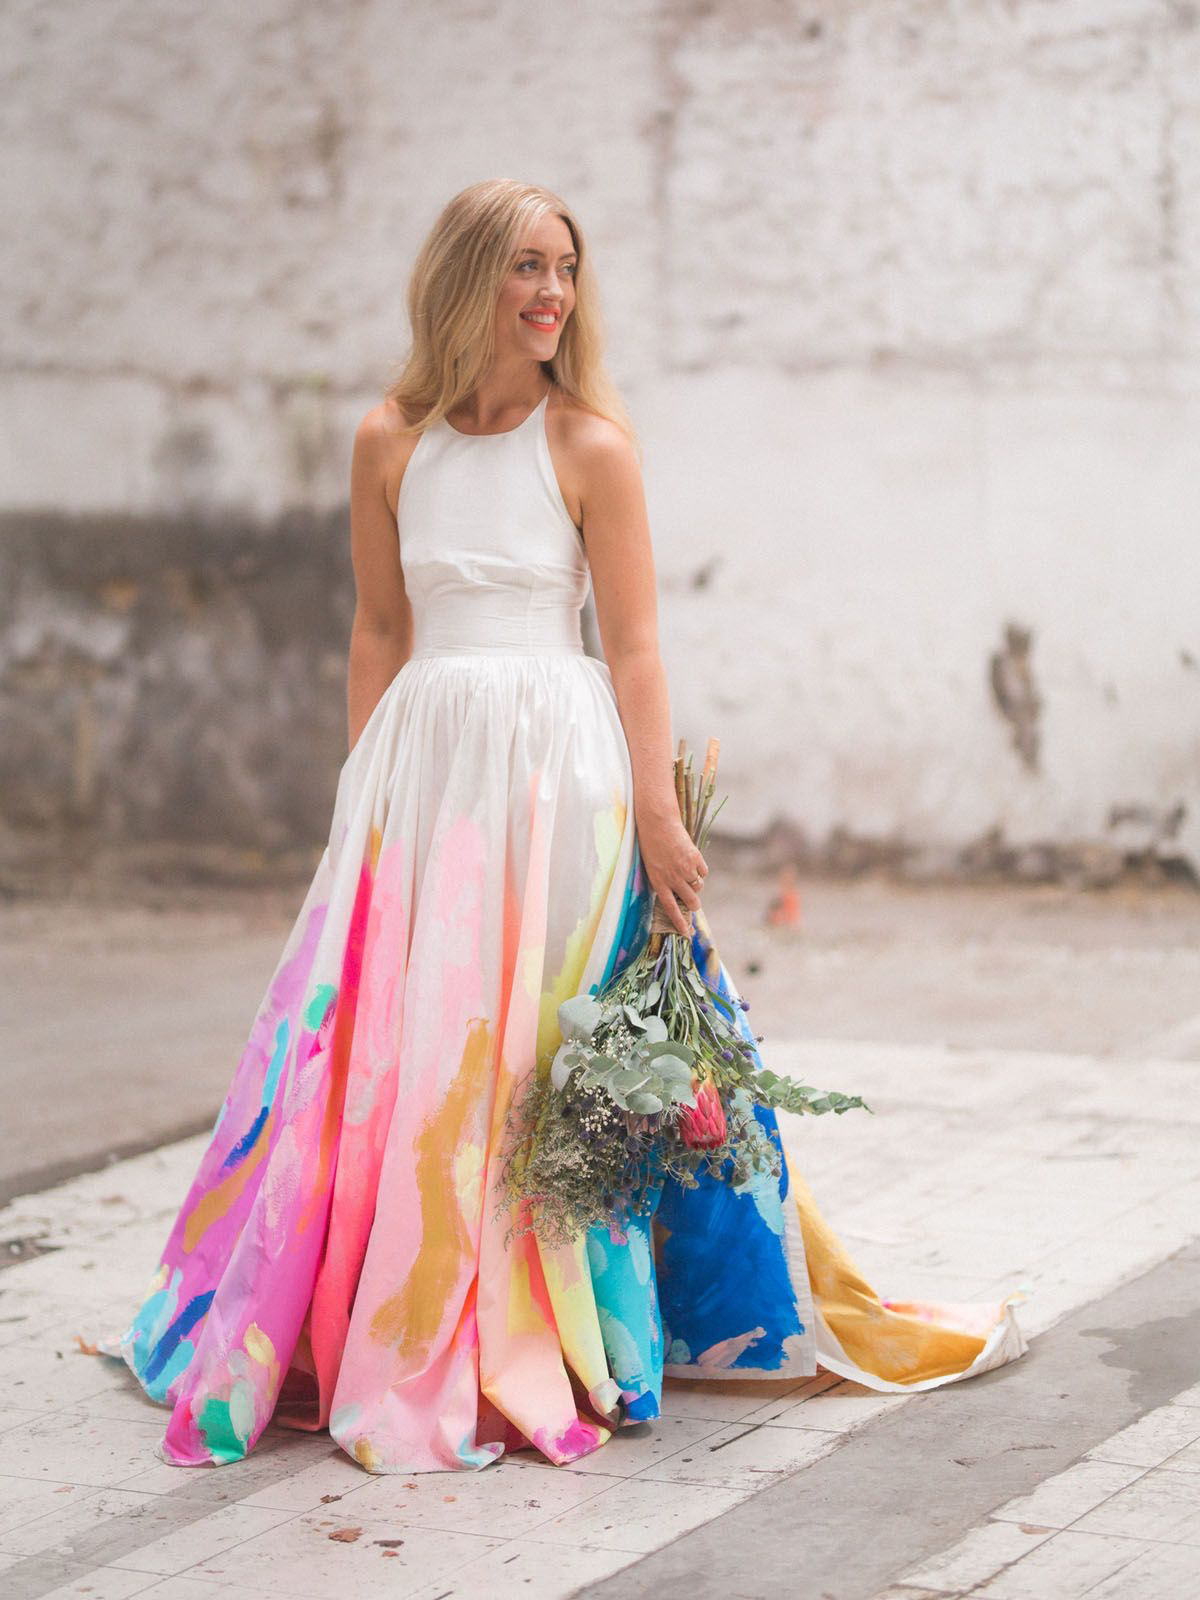 colorful wedding gowns